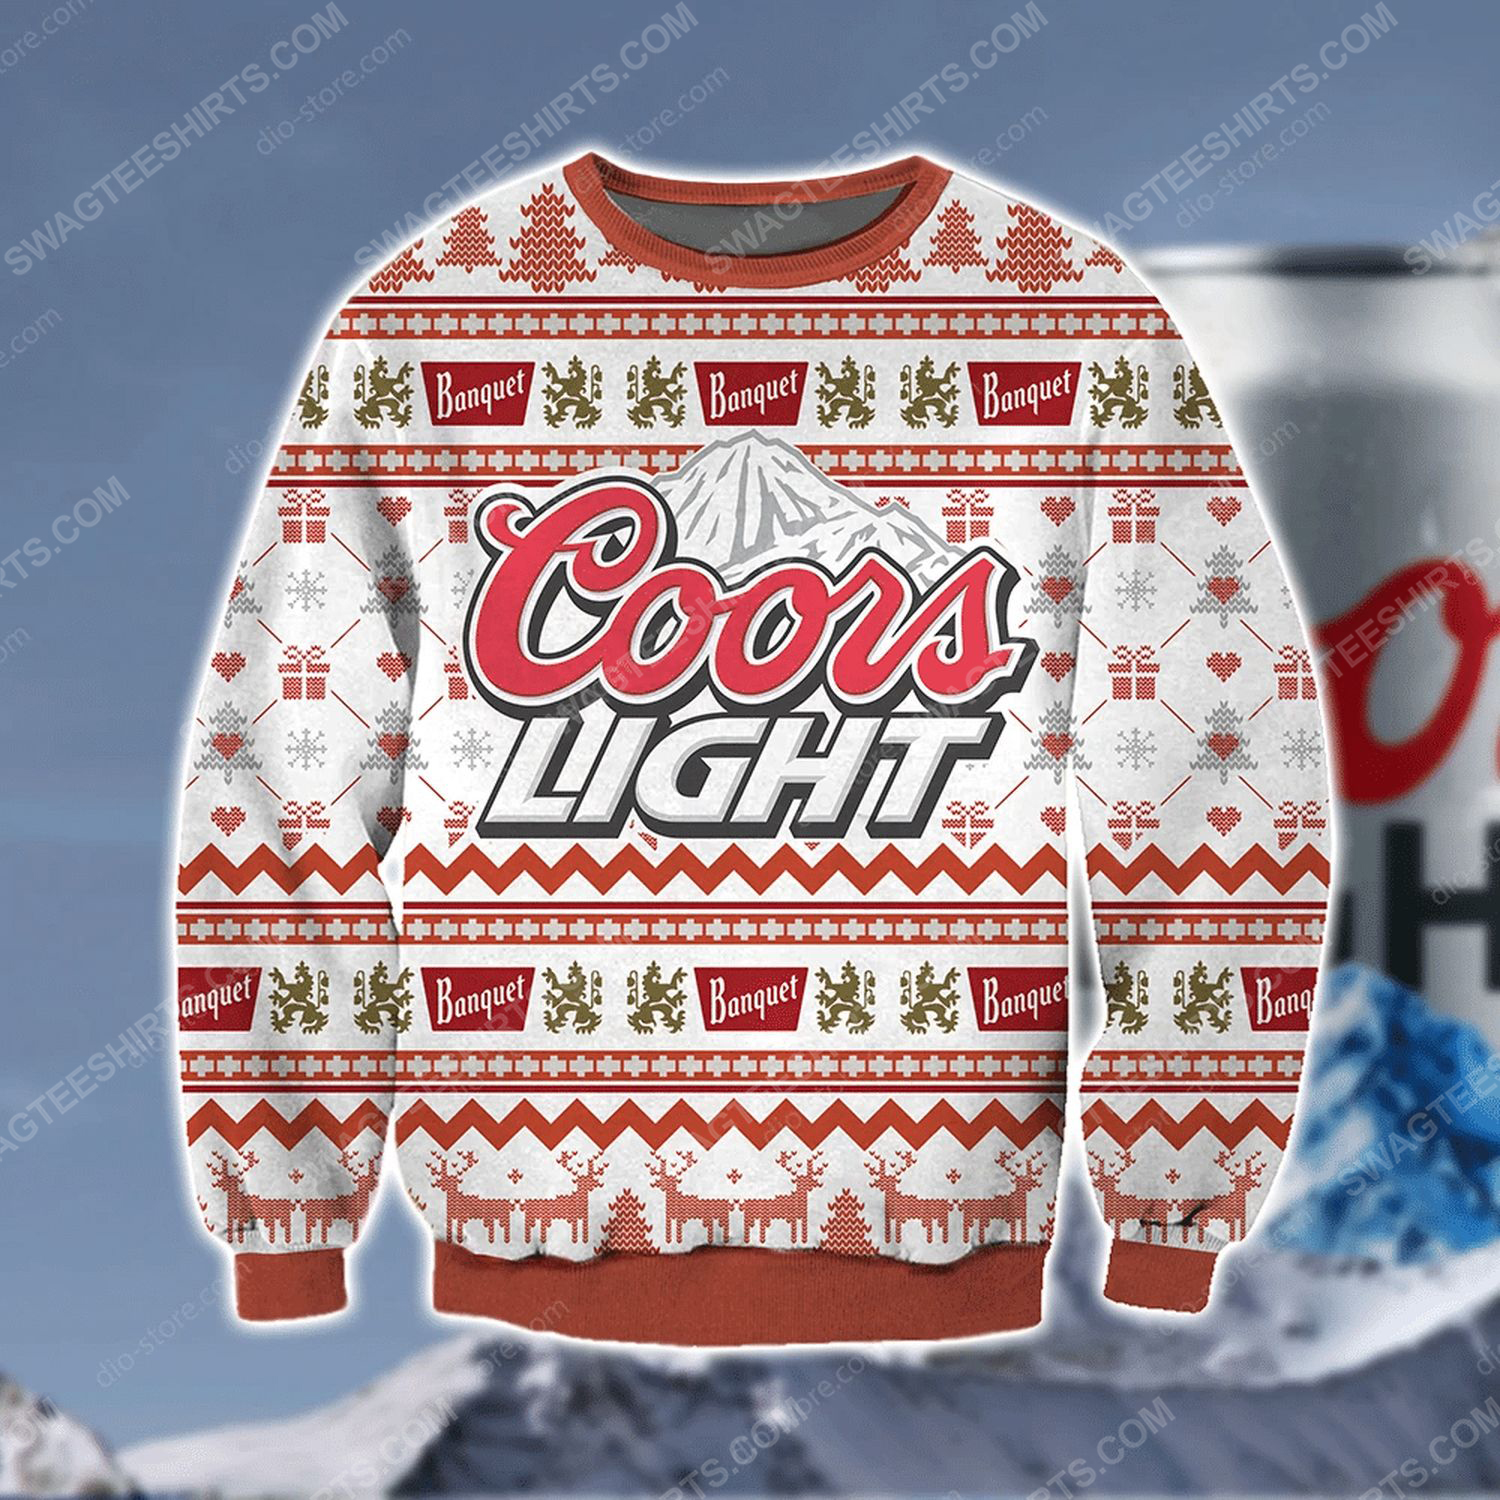 Coors light banquet beer ugly christmas sweater - Copy (3)